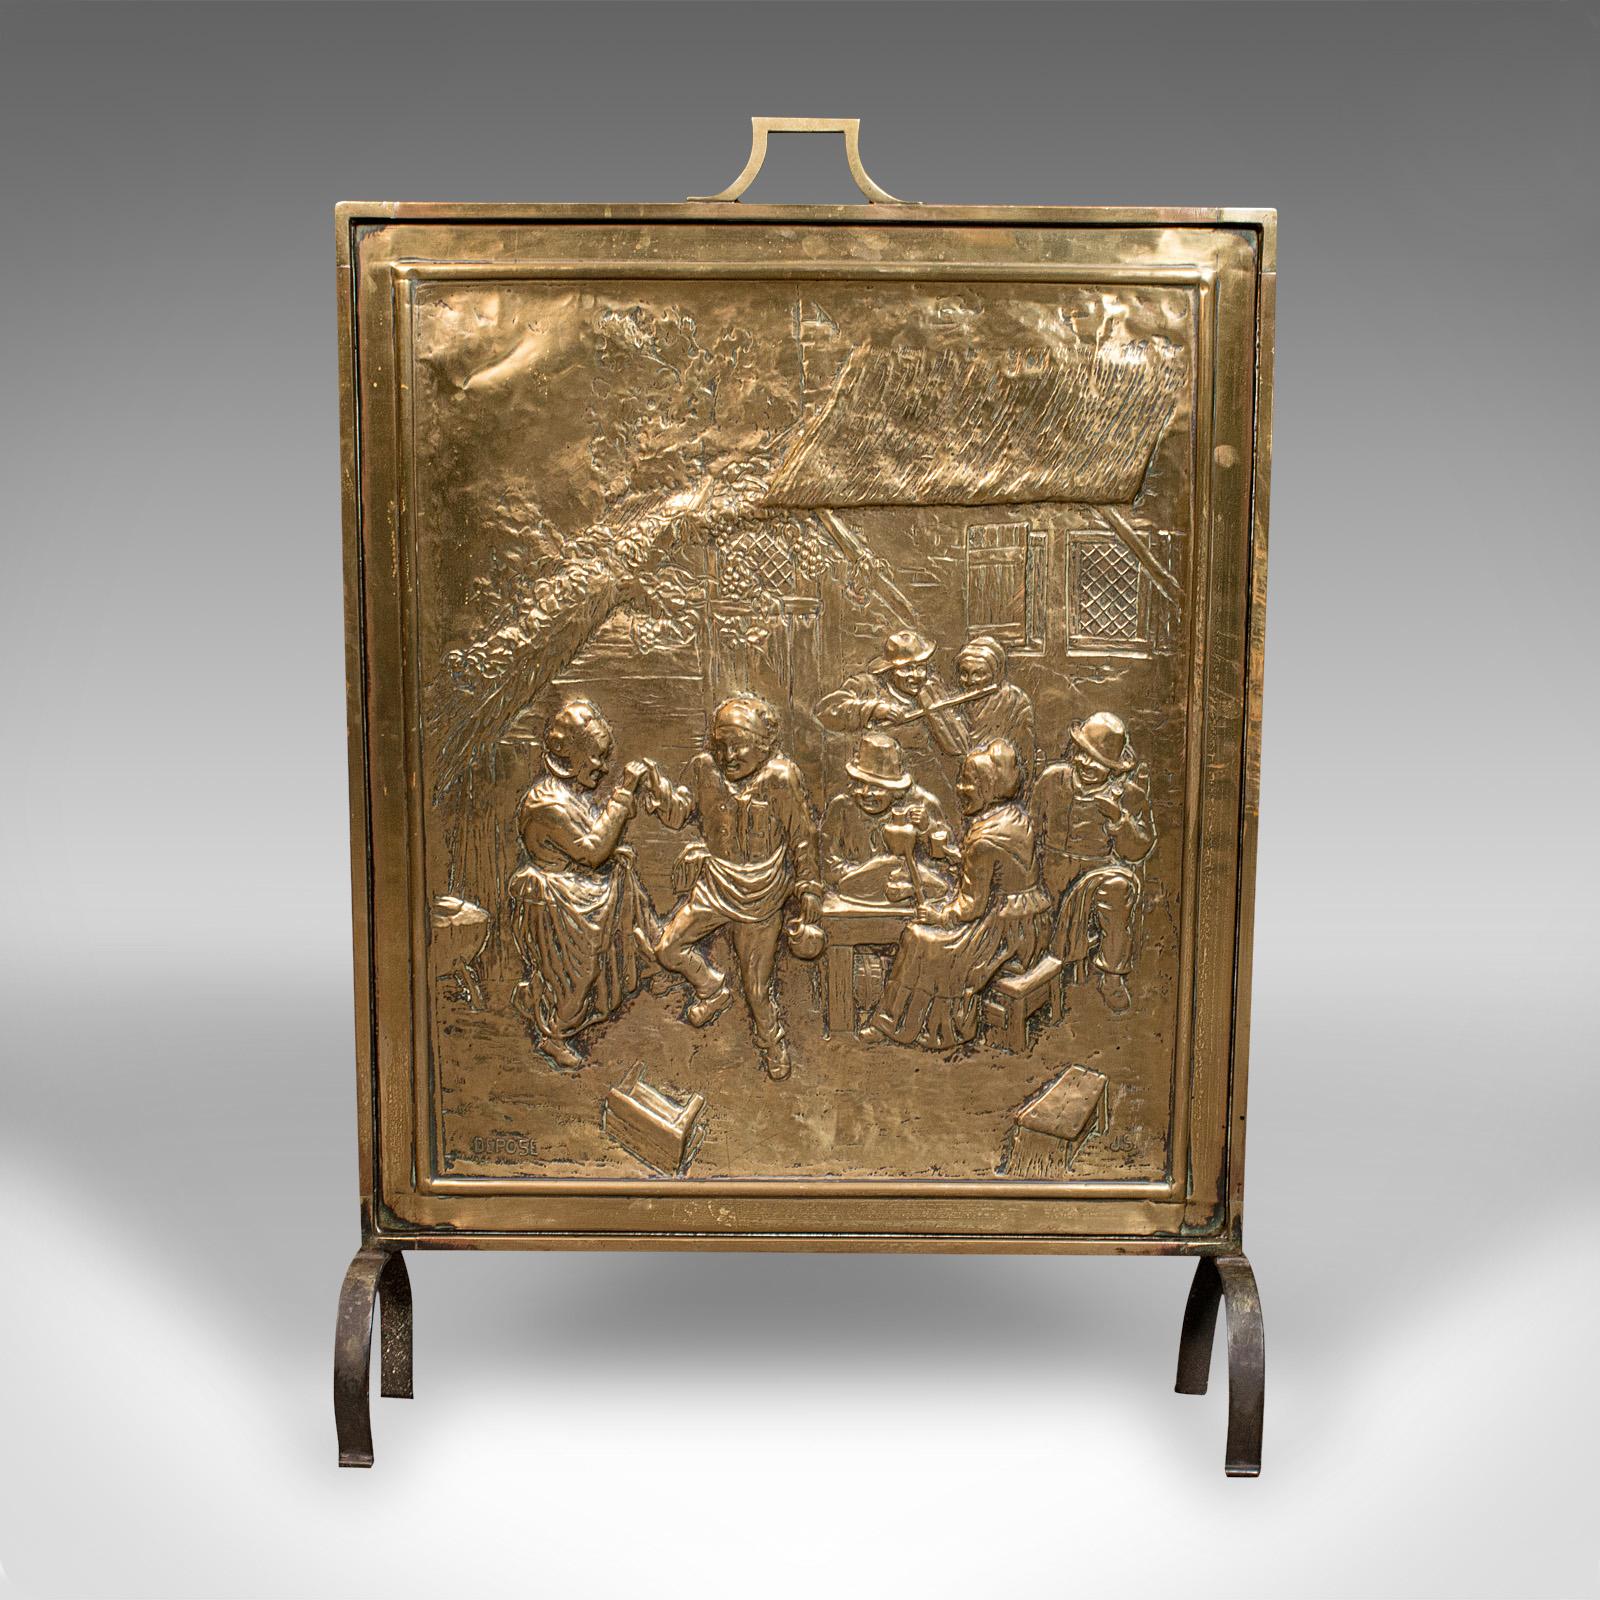 This is an antique decorative fire screen. A French, brass relief fireside heat shield, dating to the late Victorian period, circa 1900.

Superb decorative appeal for the fireside
Displays a desirable aged patina and in good order
Polished brass